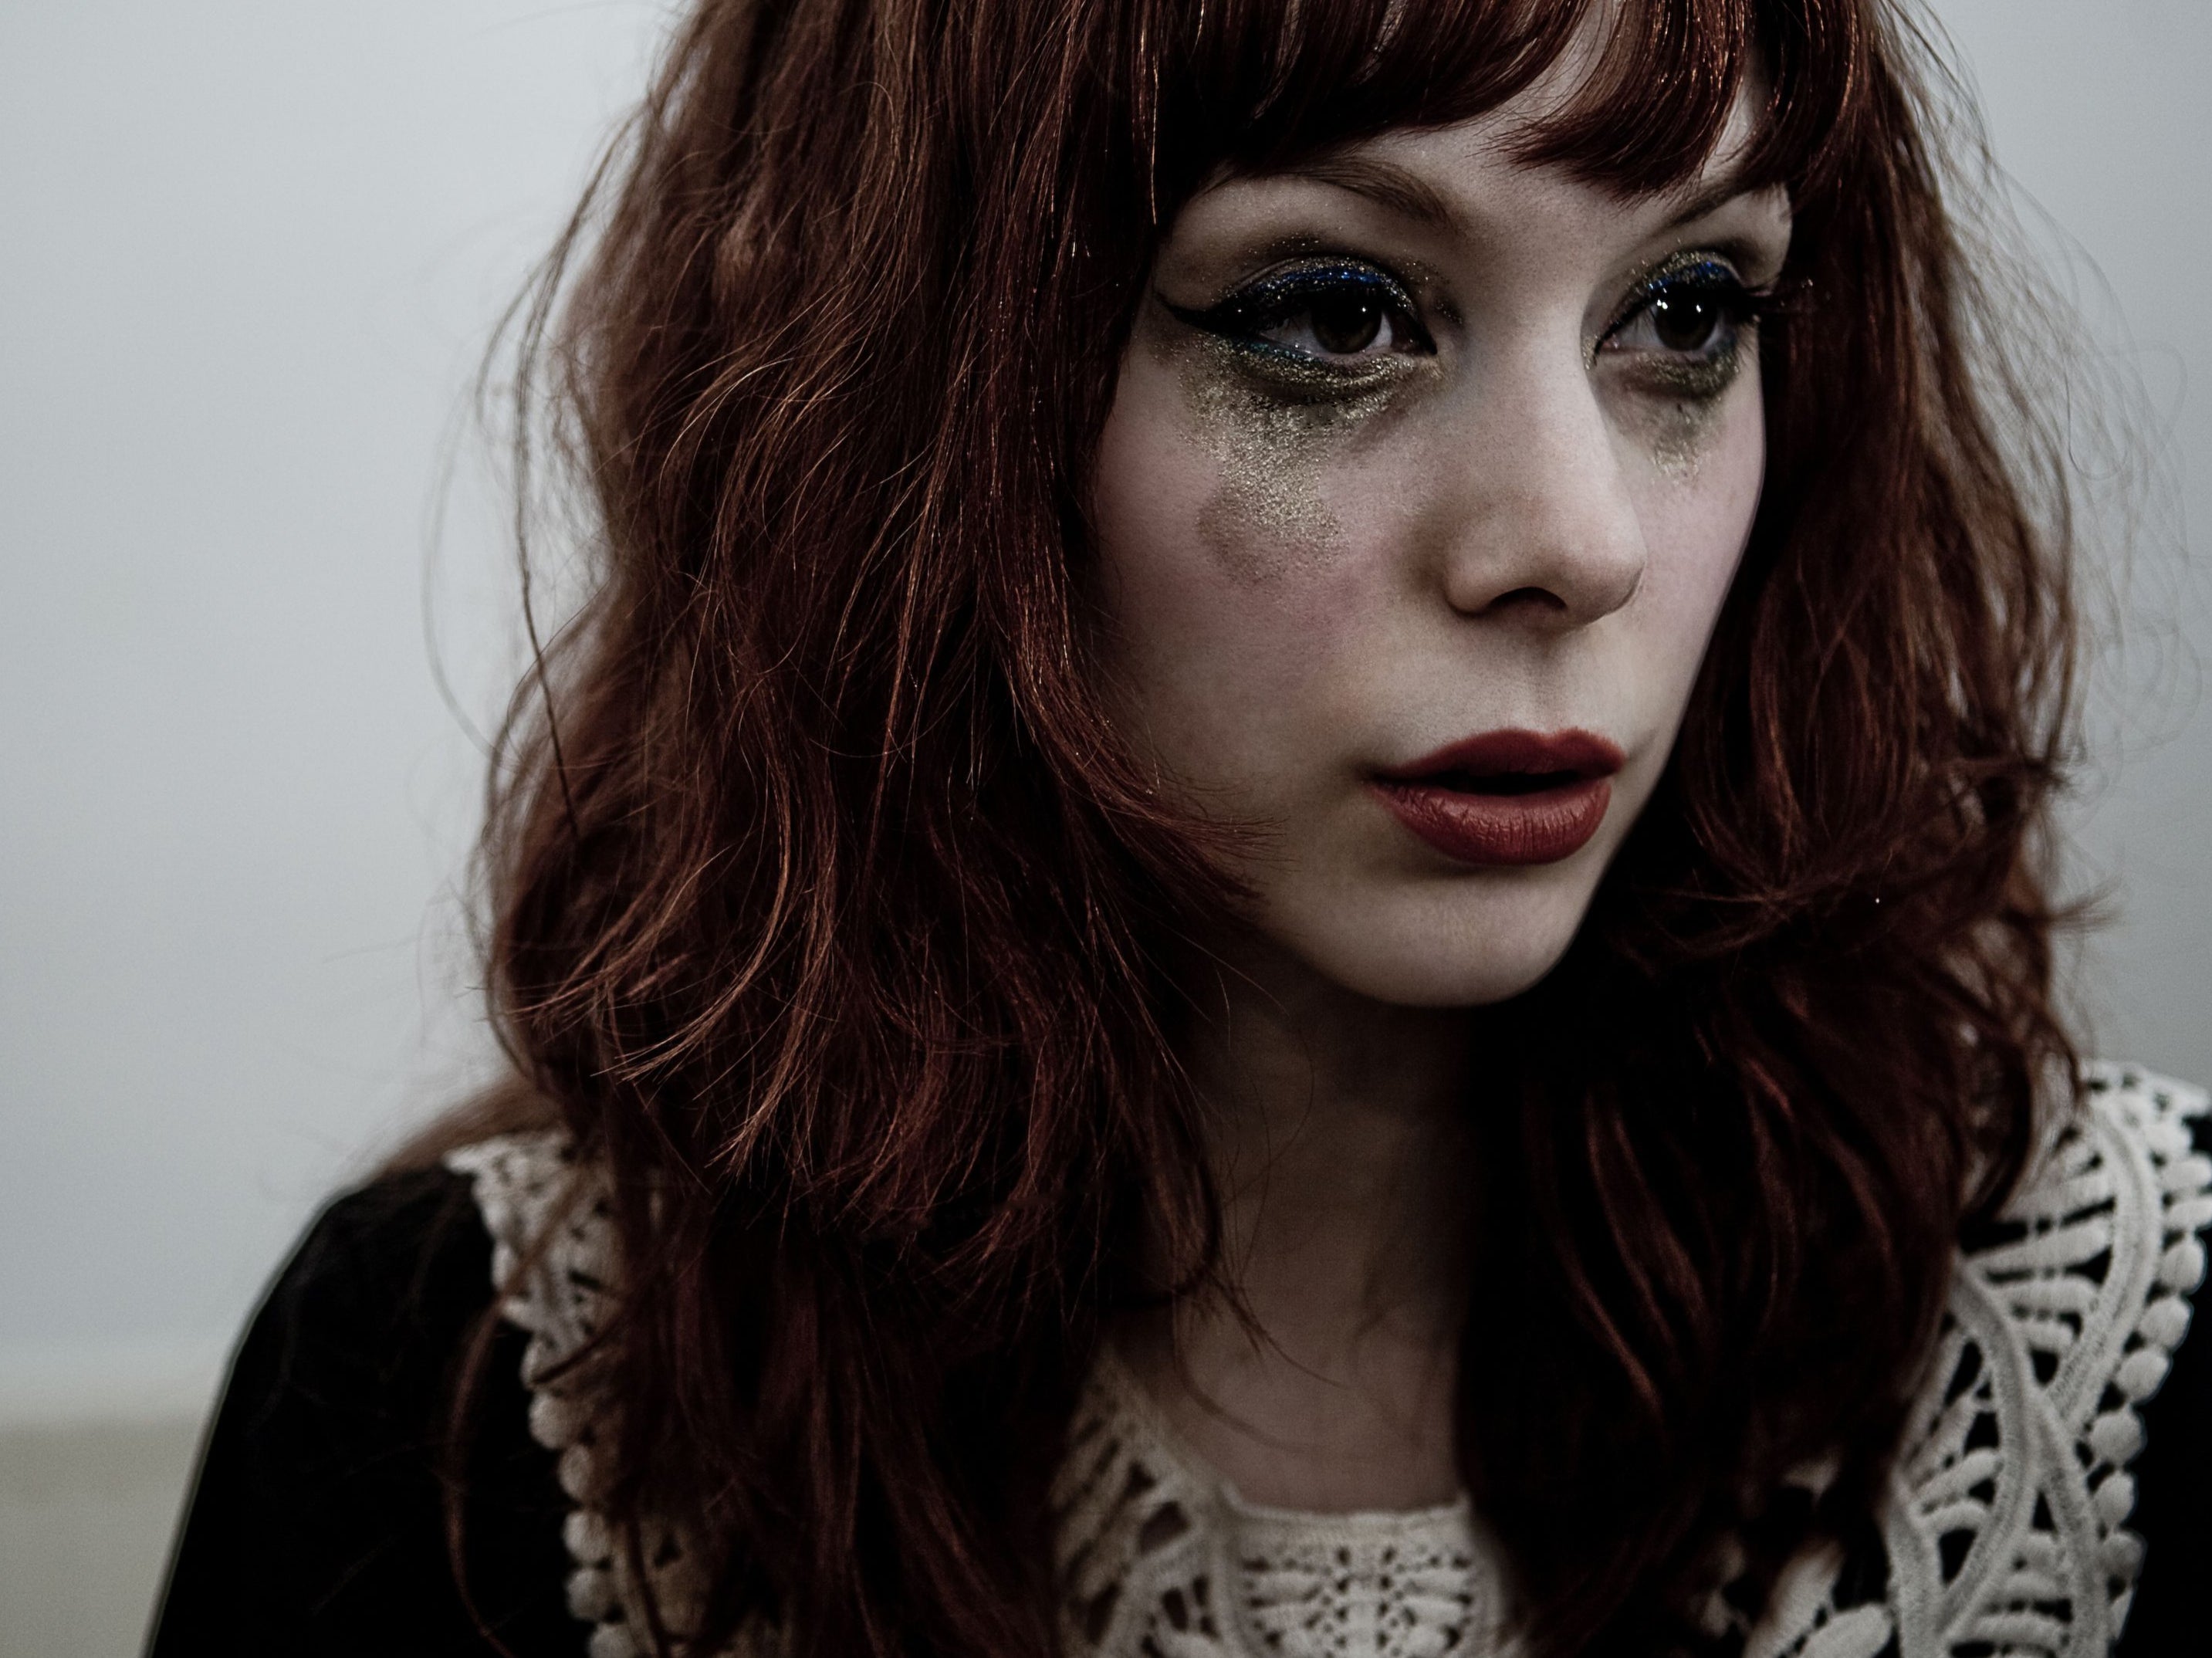 ‘Literally at the moment he would have died, I was doing the guitar for the track’ – Grief is a tangible thing on the new album from The Anchoress